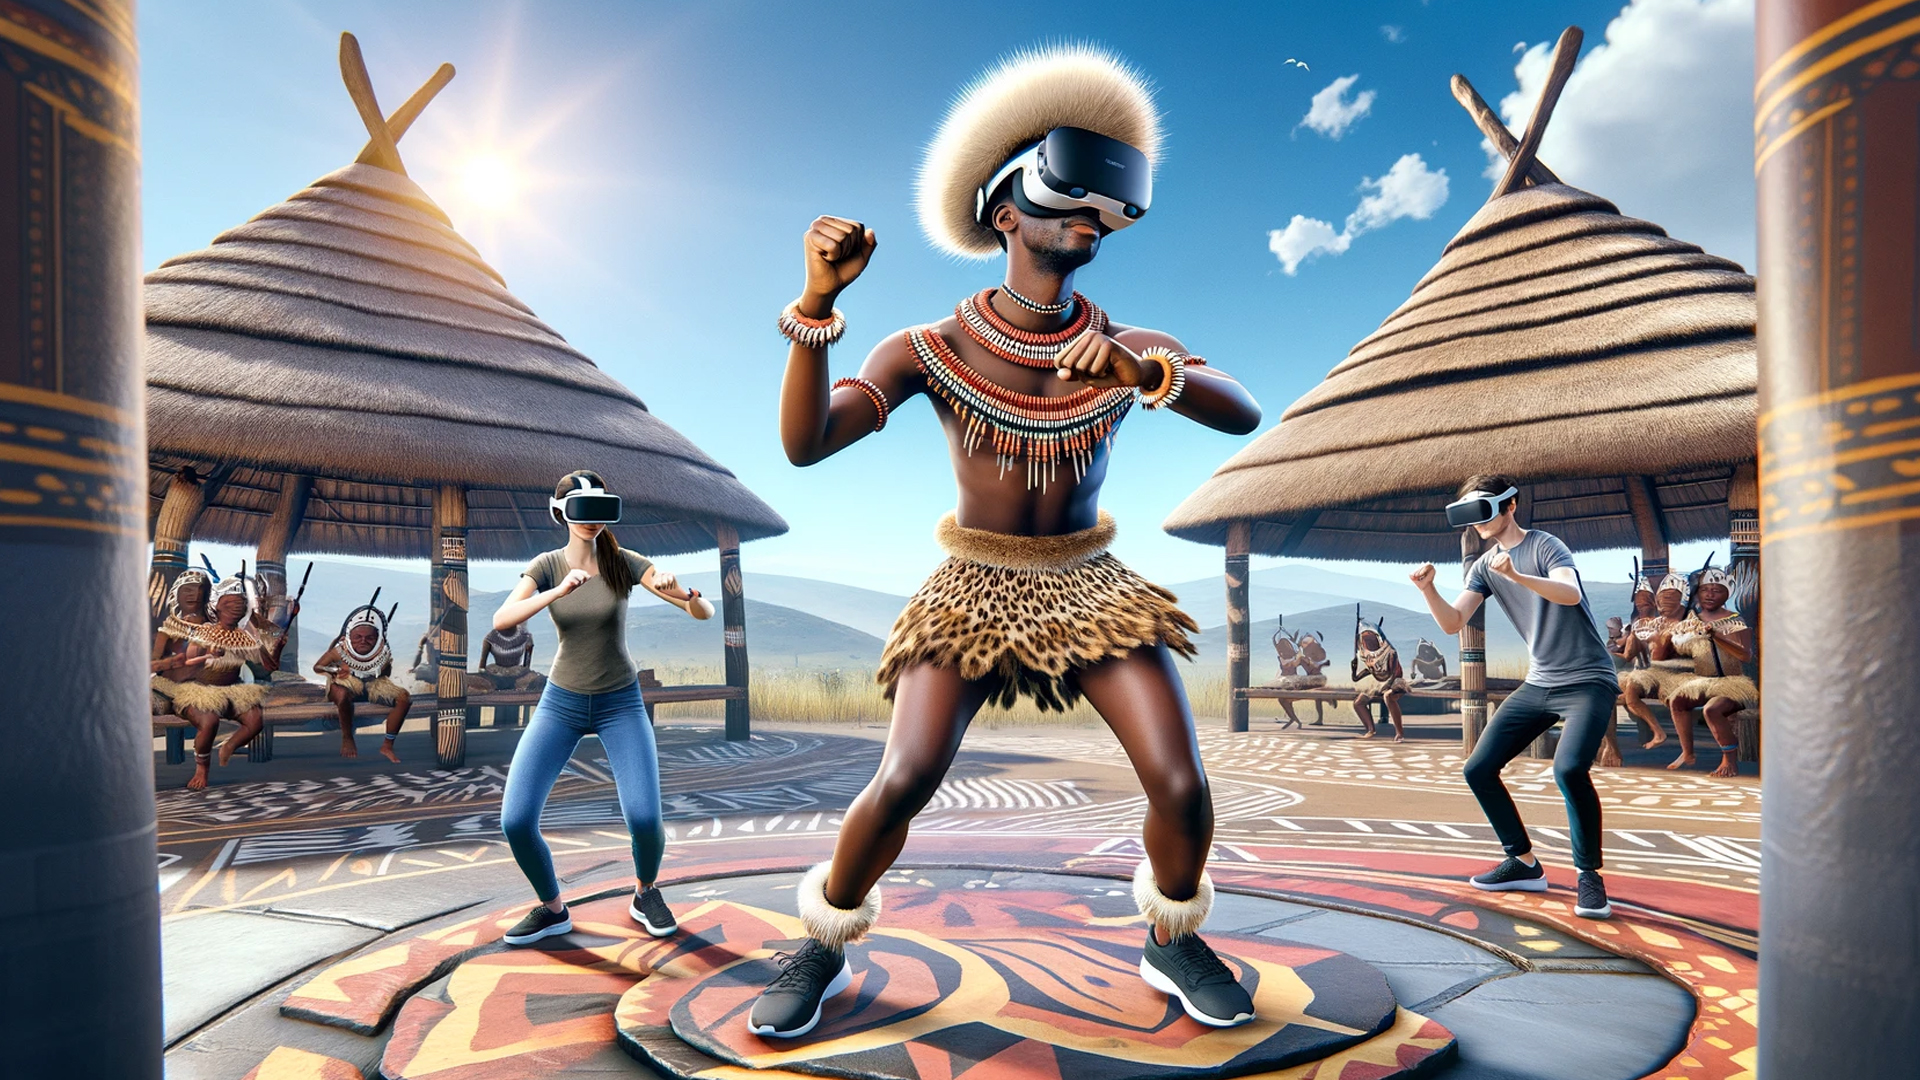 How Virtual Reality Can Promote Tourism in South Africa: The Story of the Zulus